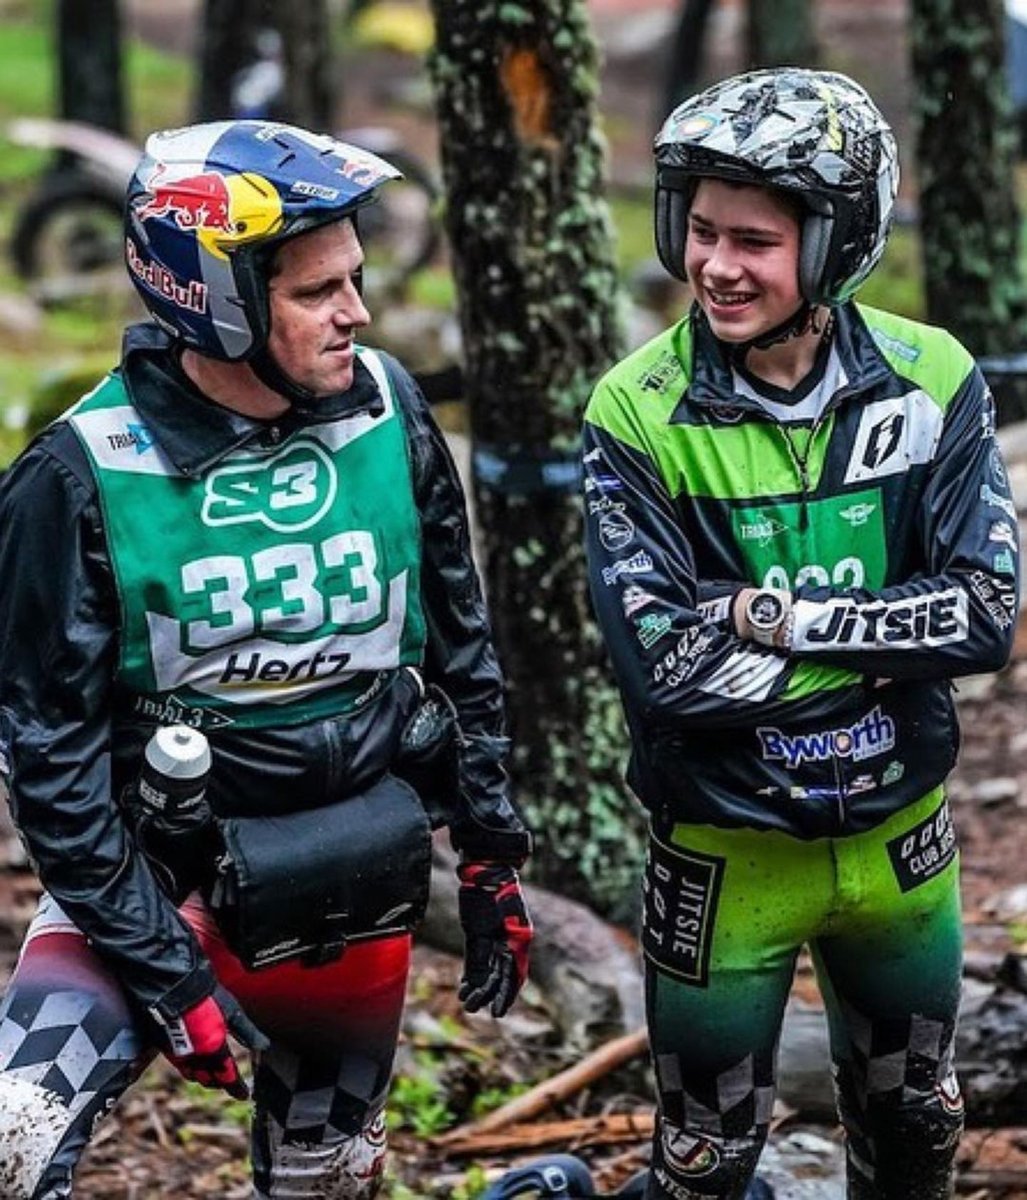 Any other father + son combos out there who would like to share their stories with us? #VertigoFamily 💚 @dougielampkin